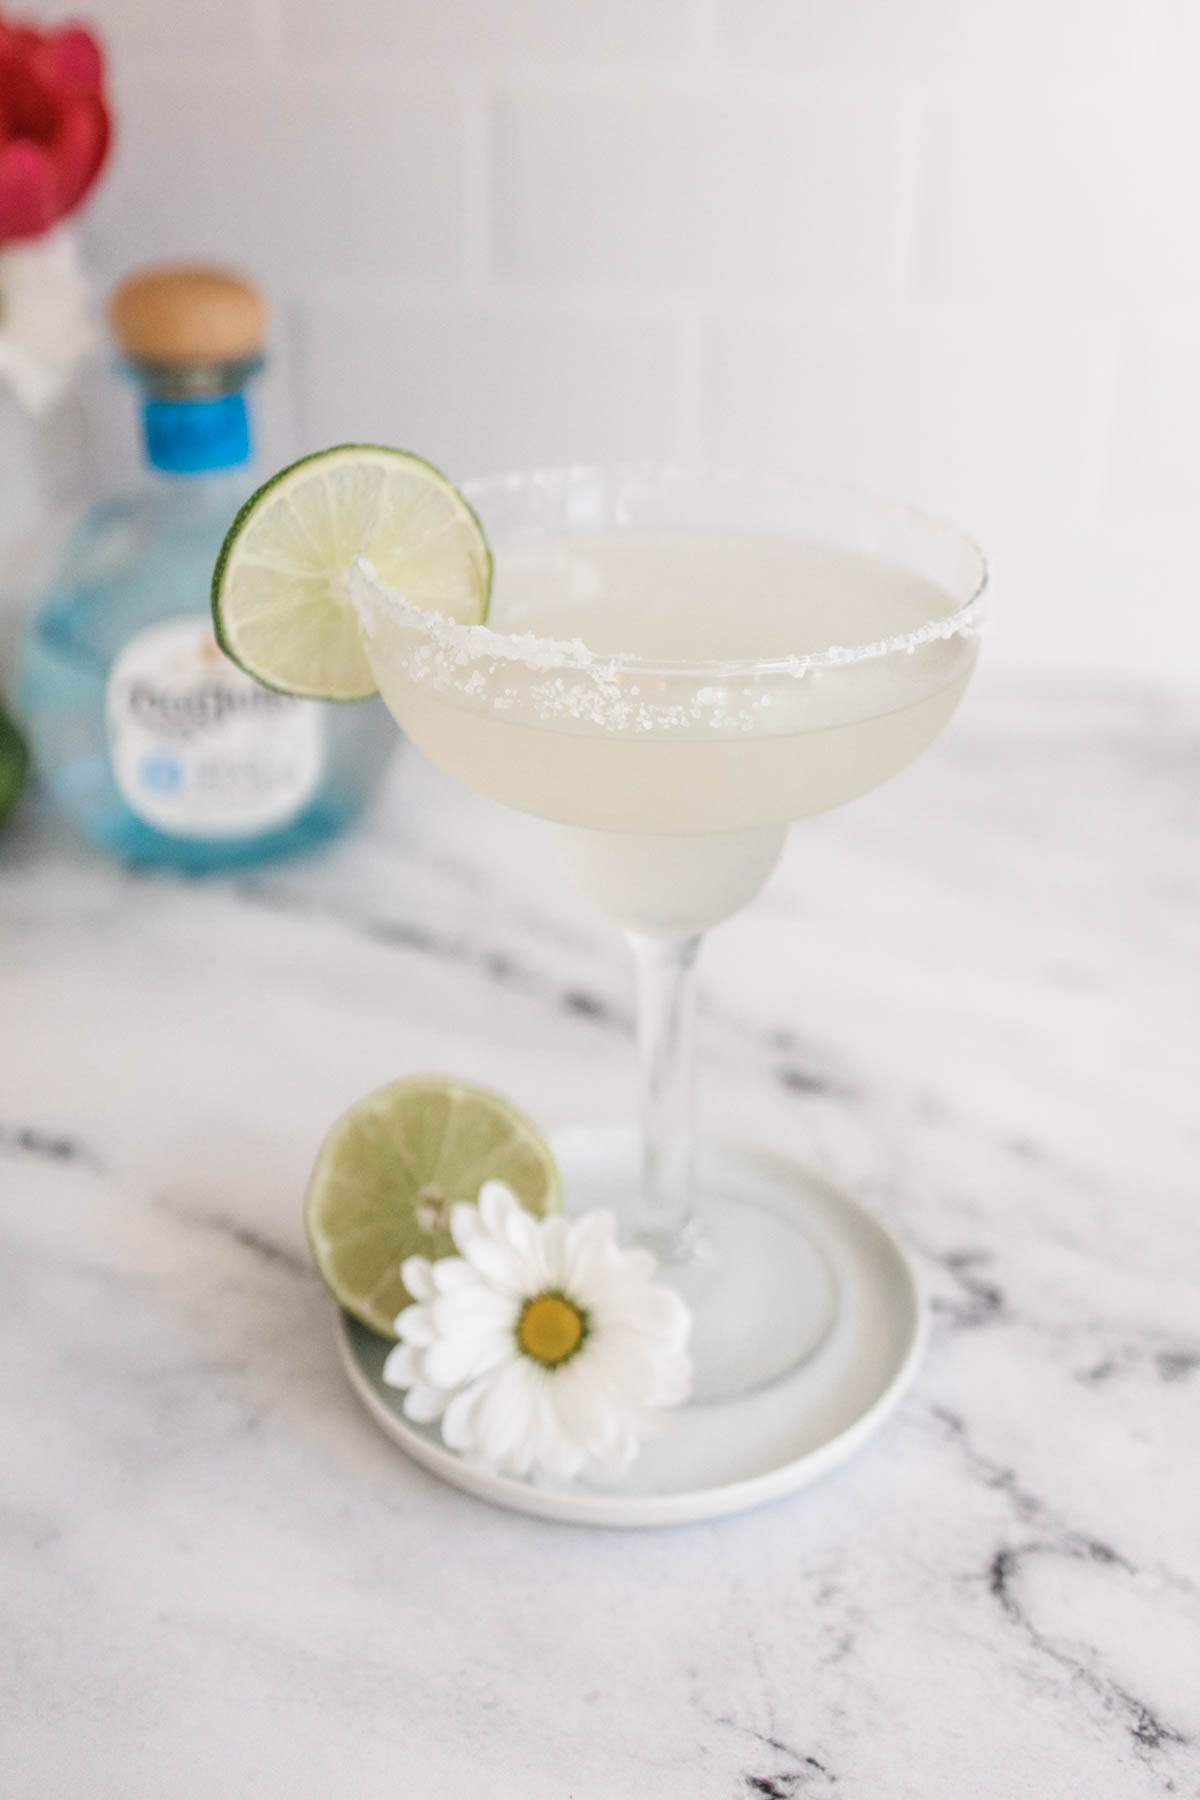 A classic margarita with 3 ingredients in a margarita glass.